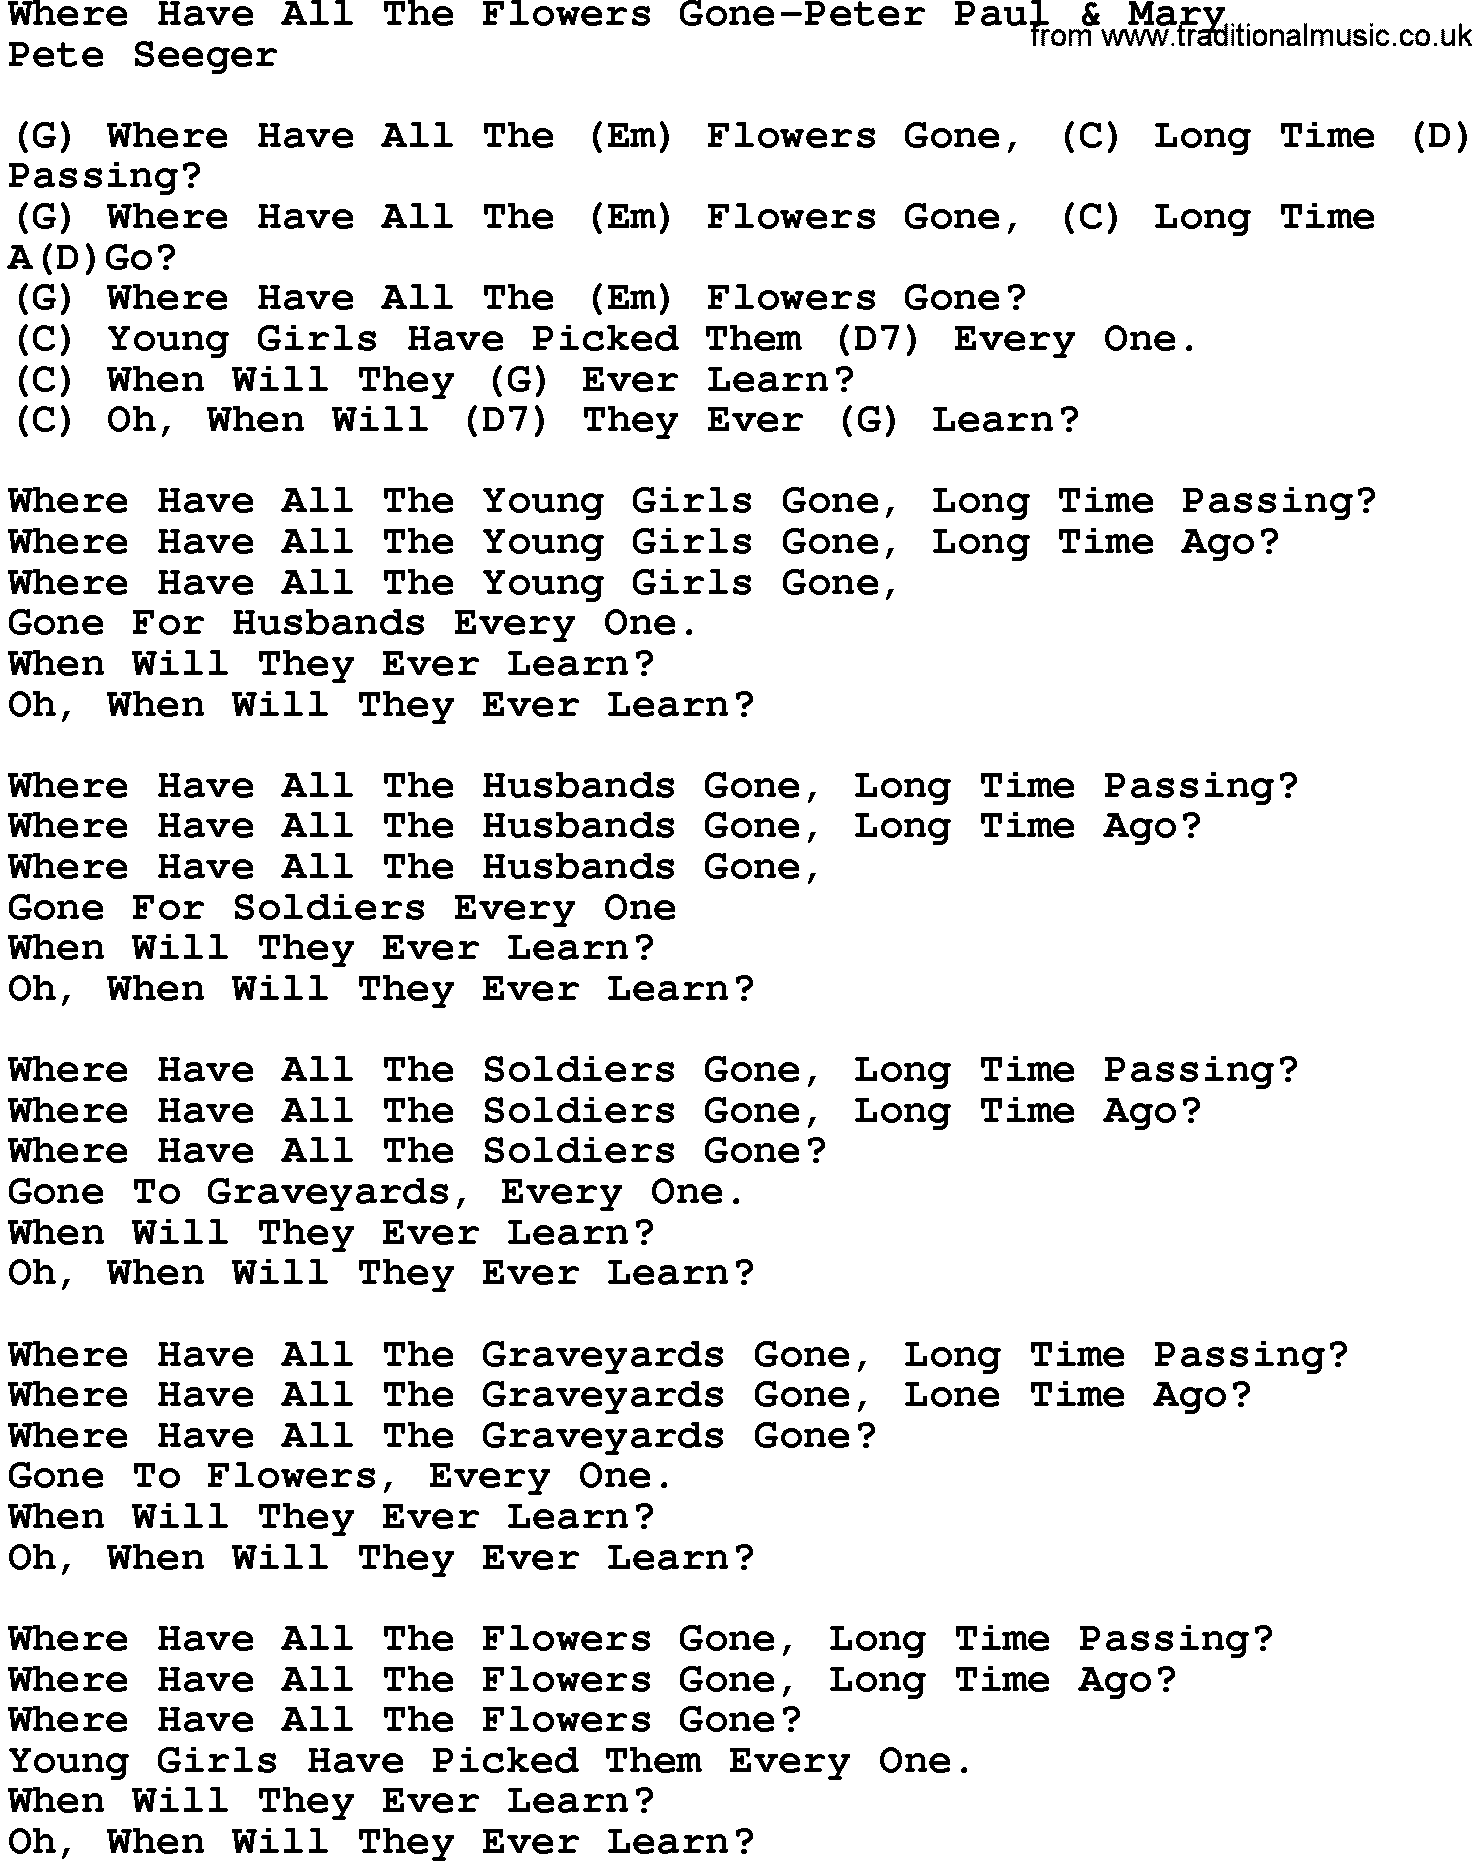 Country music song: Where Have All The Flowers Gone-Peter Paul&Mary lyrics and chords